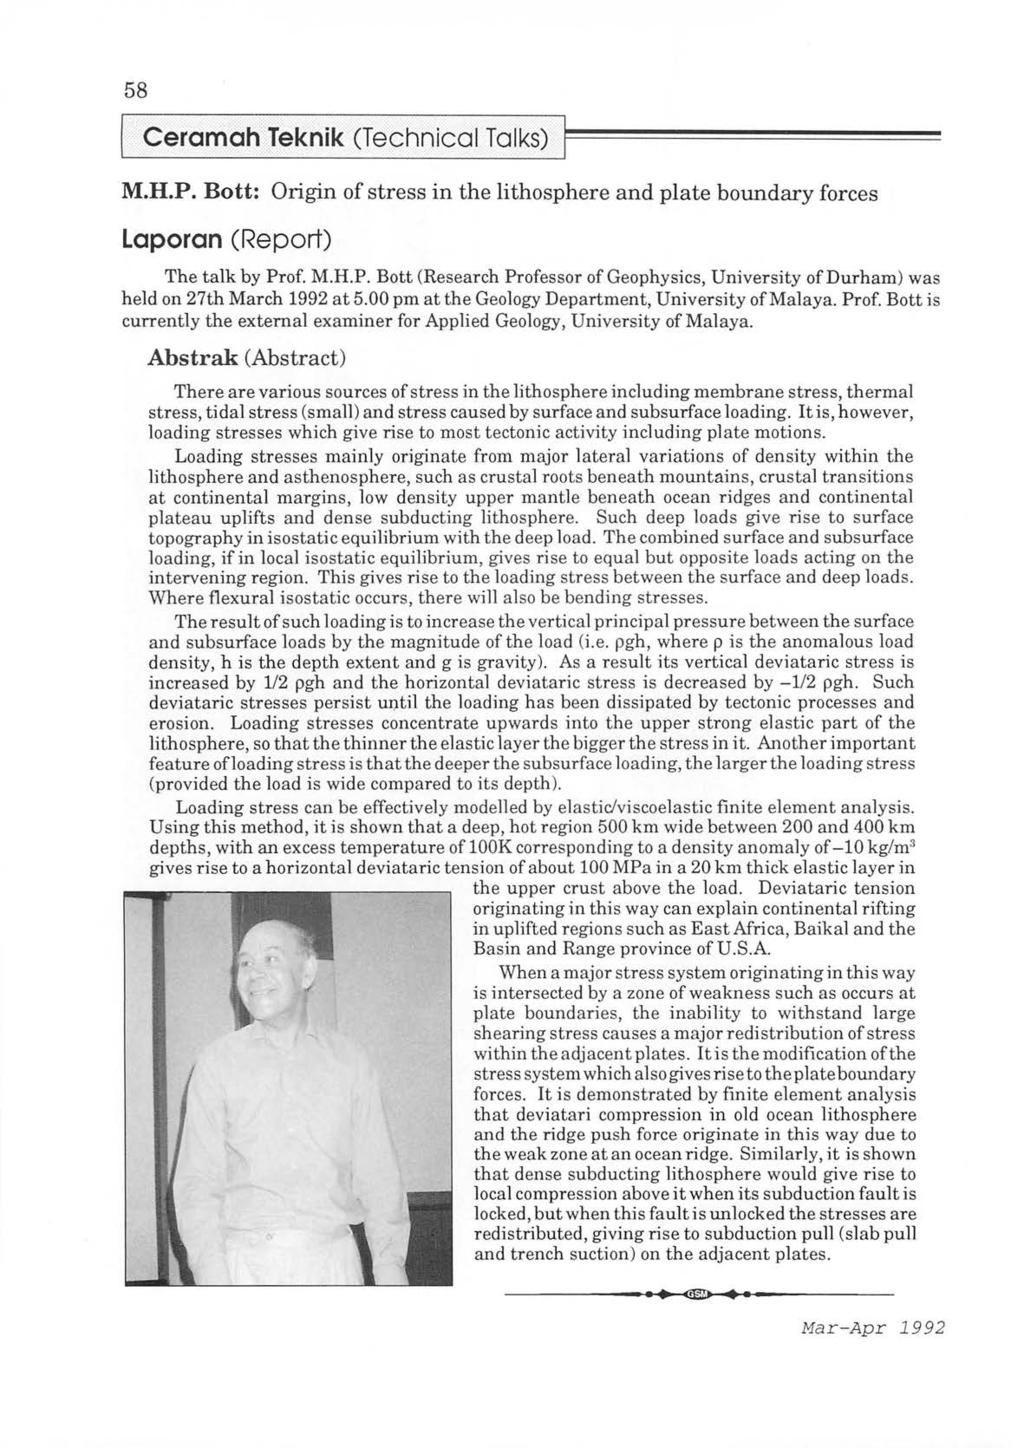 58 CeramahJeknik (Technical Talks) M.H.P. Bott: Origin of stress in the lithosphere and plate boundary forces Laporan (Report) The talk by Prof. M.H.P. Bott (Research Professor of Geophysics, University of Durham) was held on 27th March 1992 at 5.